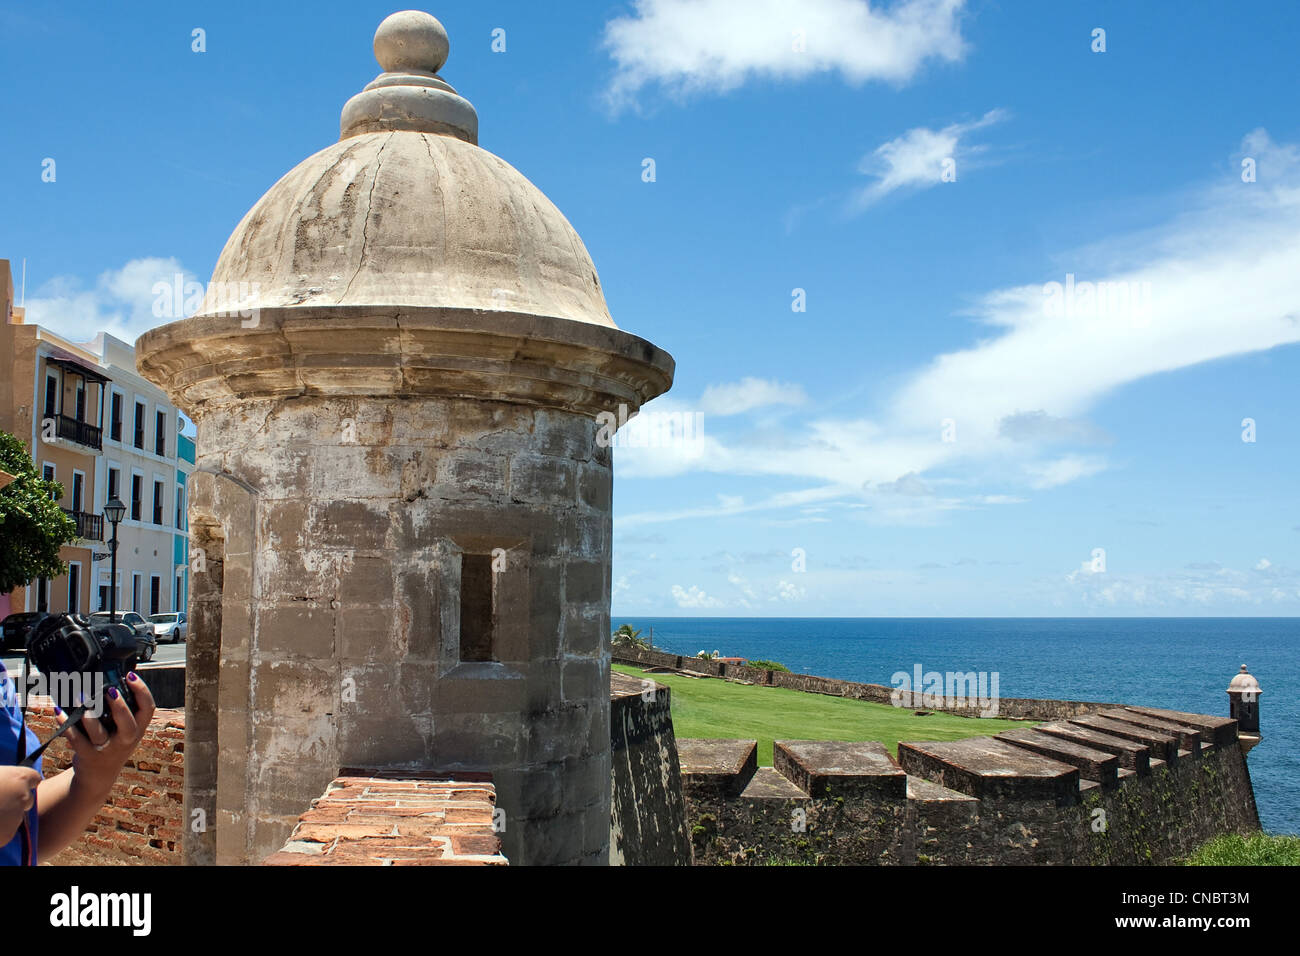 A view of the historic San Cristobal fortification towers located in Old San Juan Puerto Rico with views of El Morro. Stock Photo